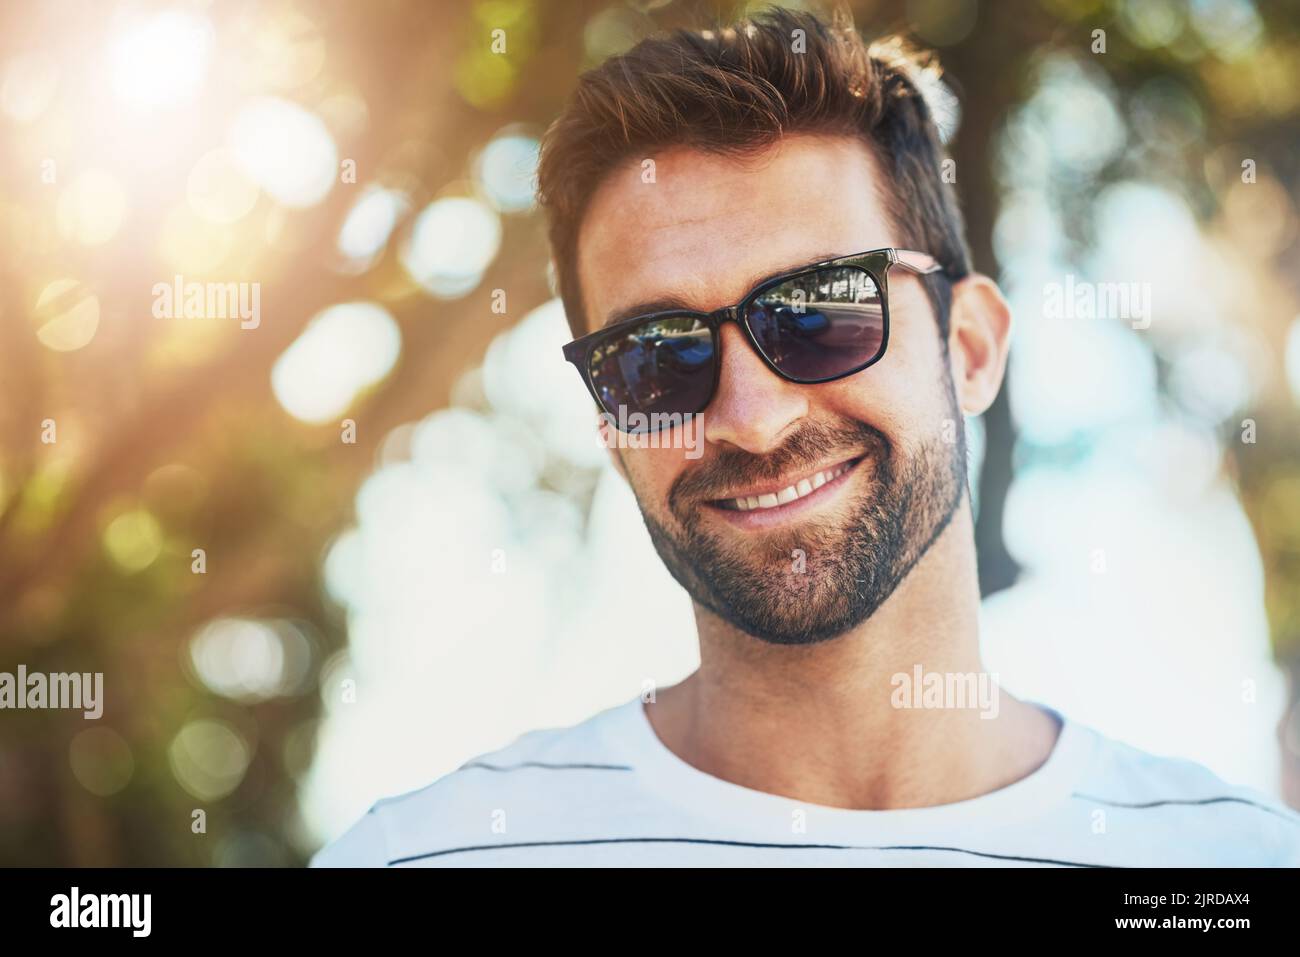 Keeping his look cool for those hot days. Cropped portrait of a handsome young man wearing sunglasses on a summers day outdoors. Stock Photo